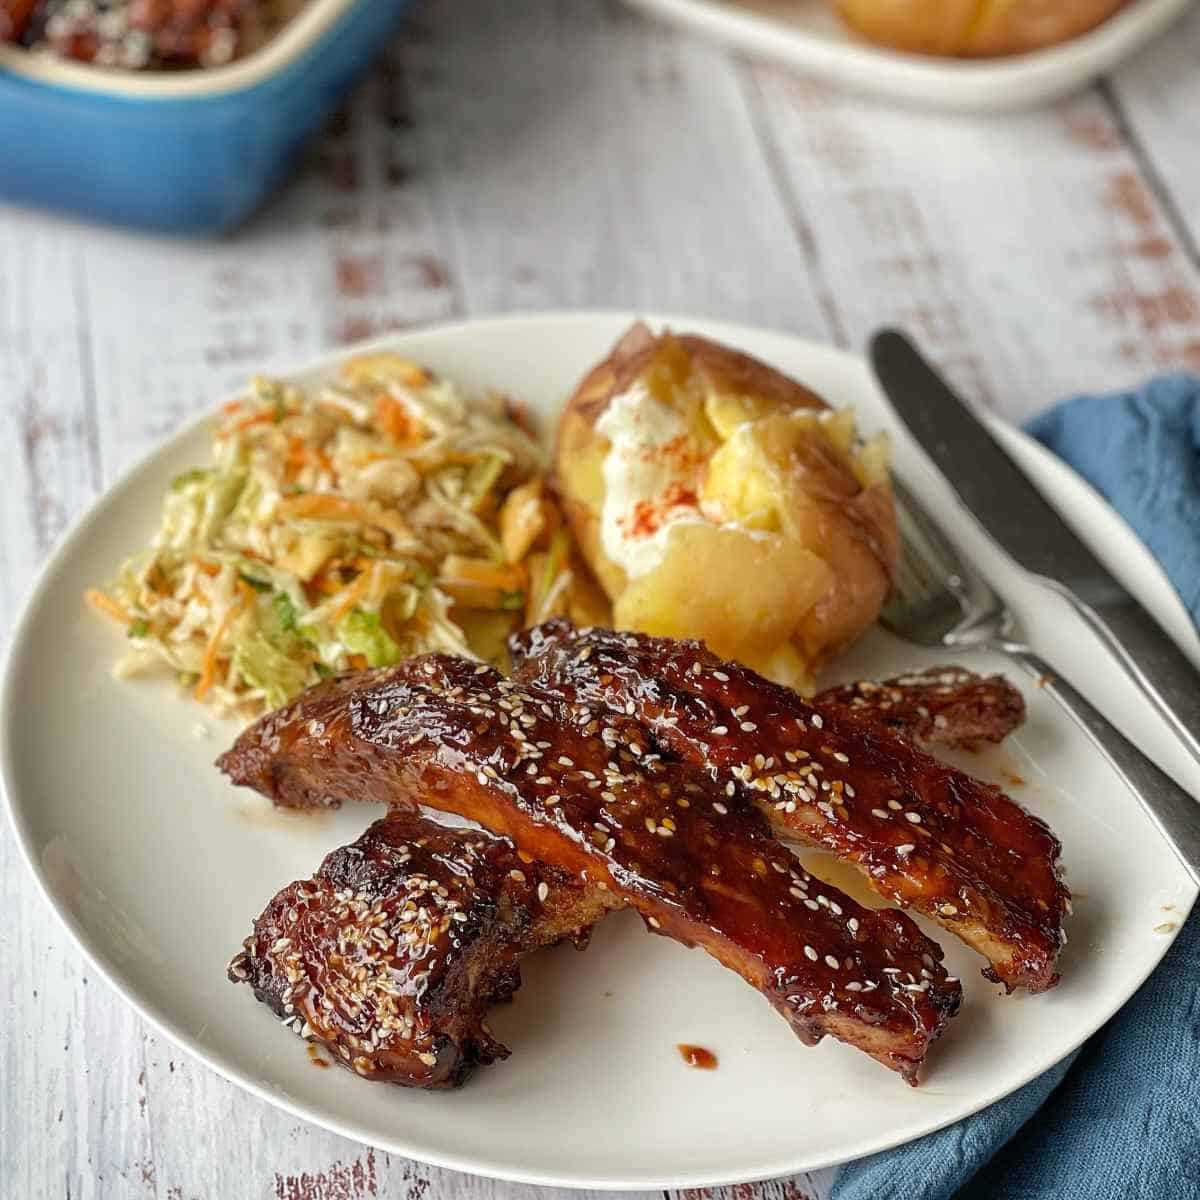 Pork ribs, a baked potato and coleslaw on a white plate. 